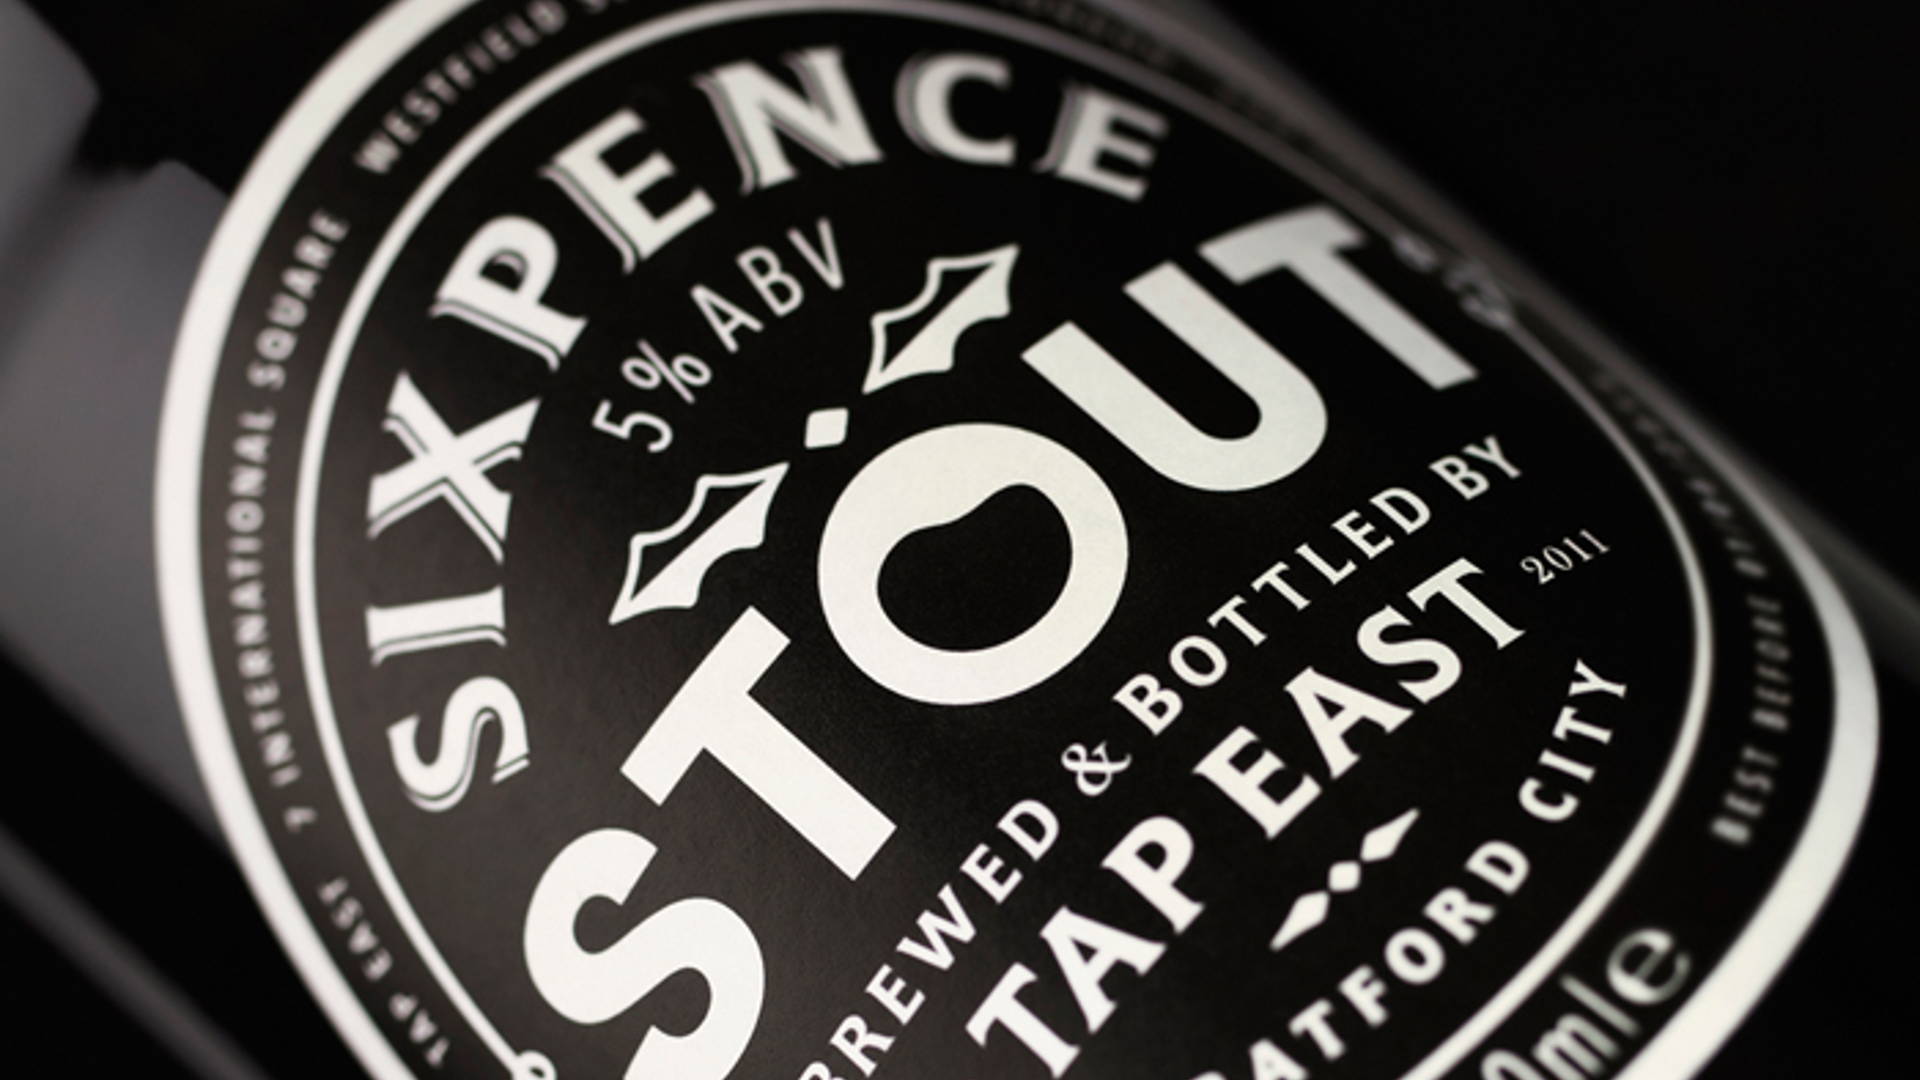 Featured image for Tap East Brewery: Limited Edition Sixpence Stout